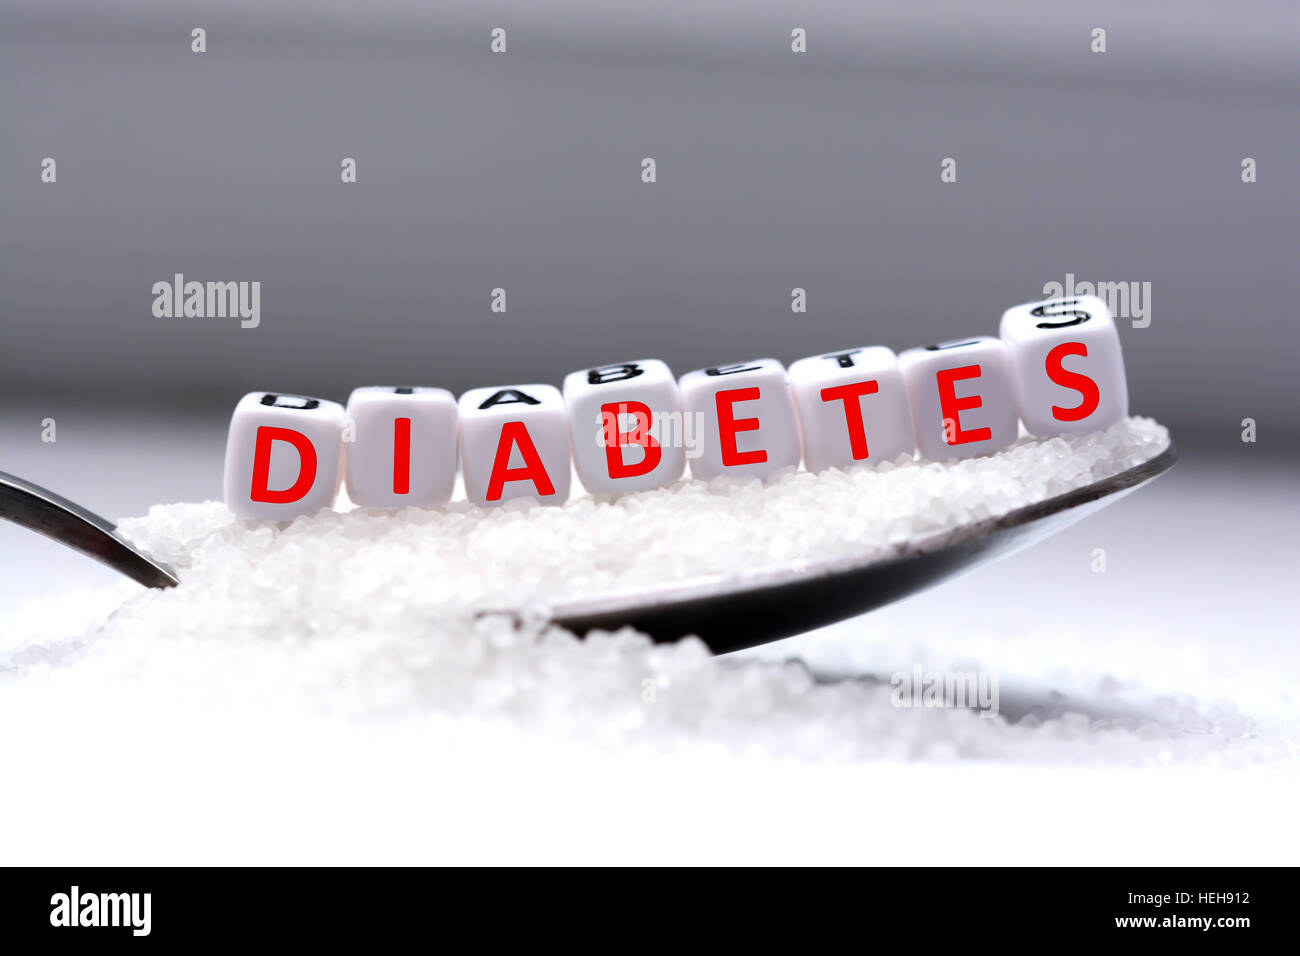 Plastic letter beads spelling “diabetes” in a spoon full of sugar Stock Photo